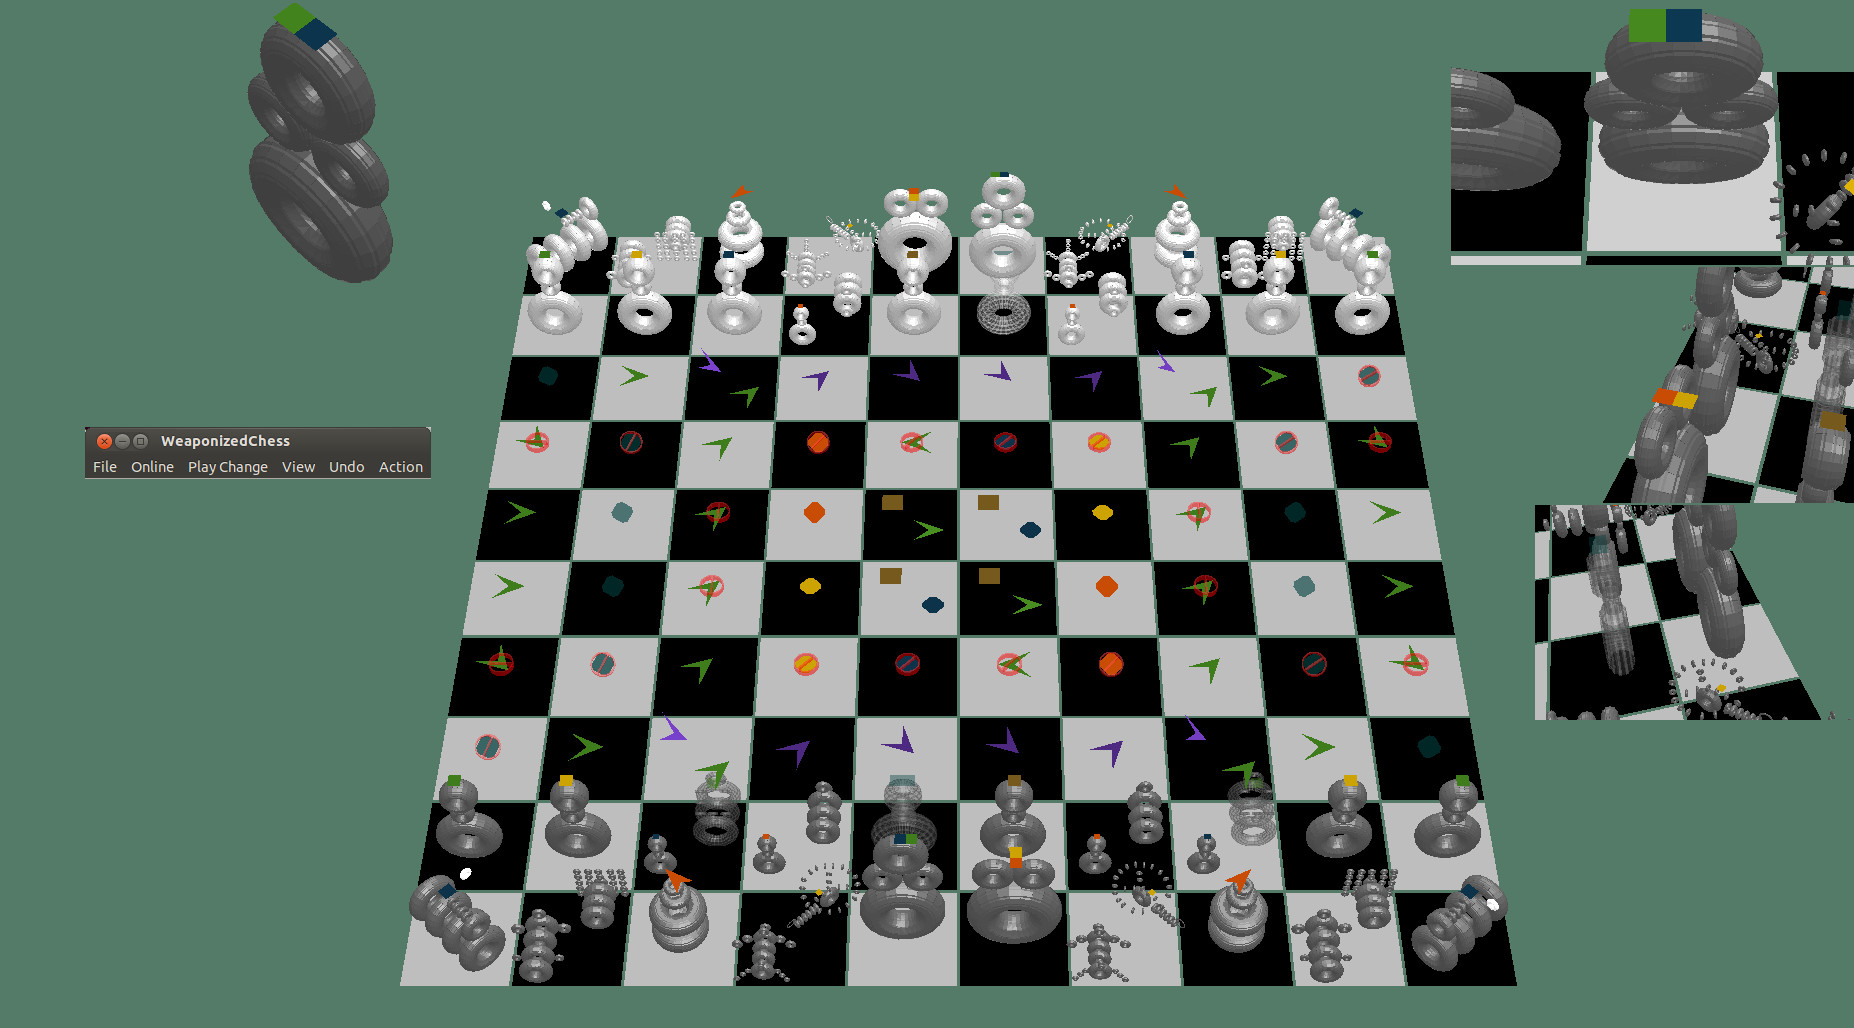 Cyber Game Chess Set With Chessboard PC Game Chess Pieces -  Portugal